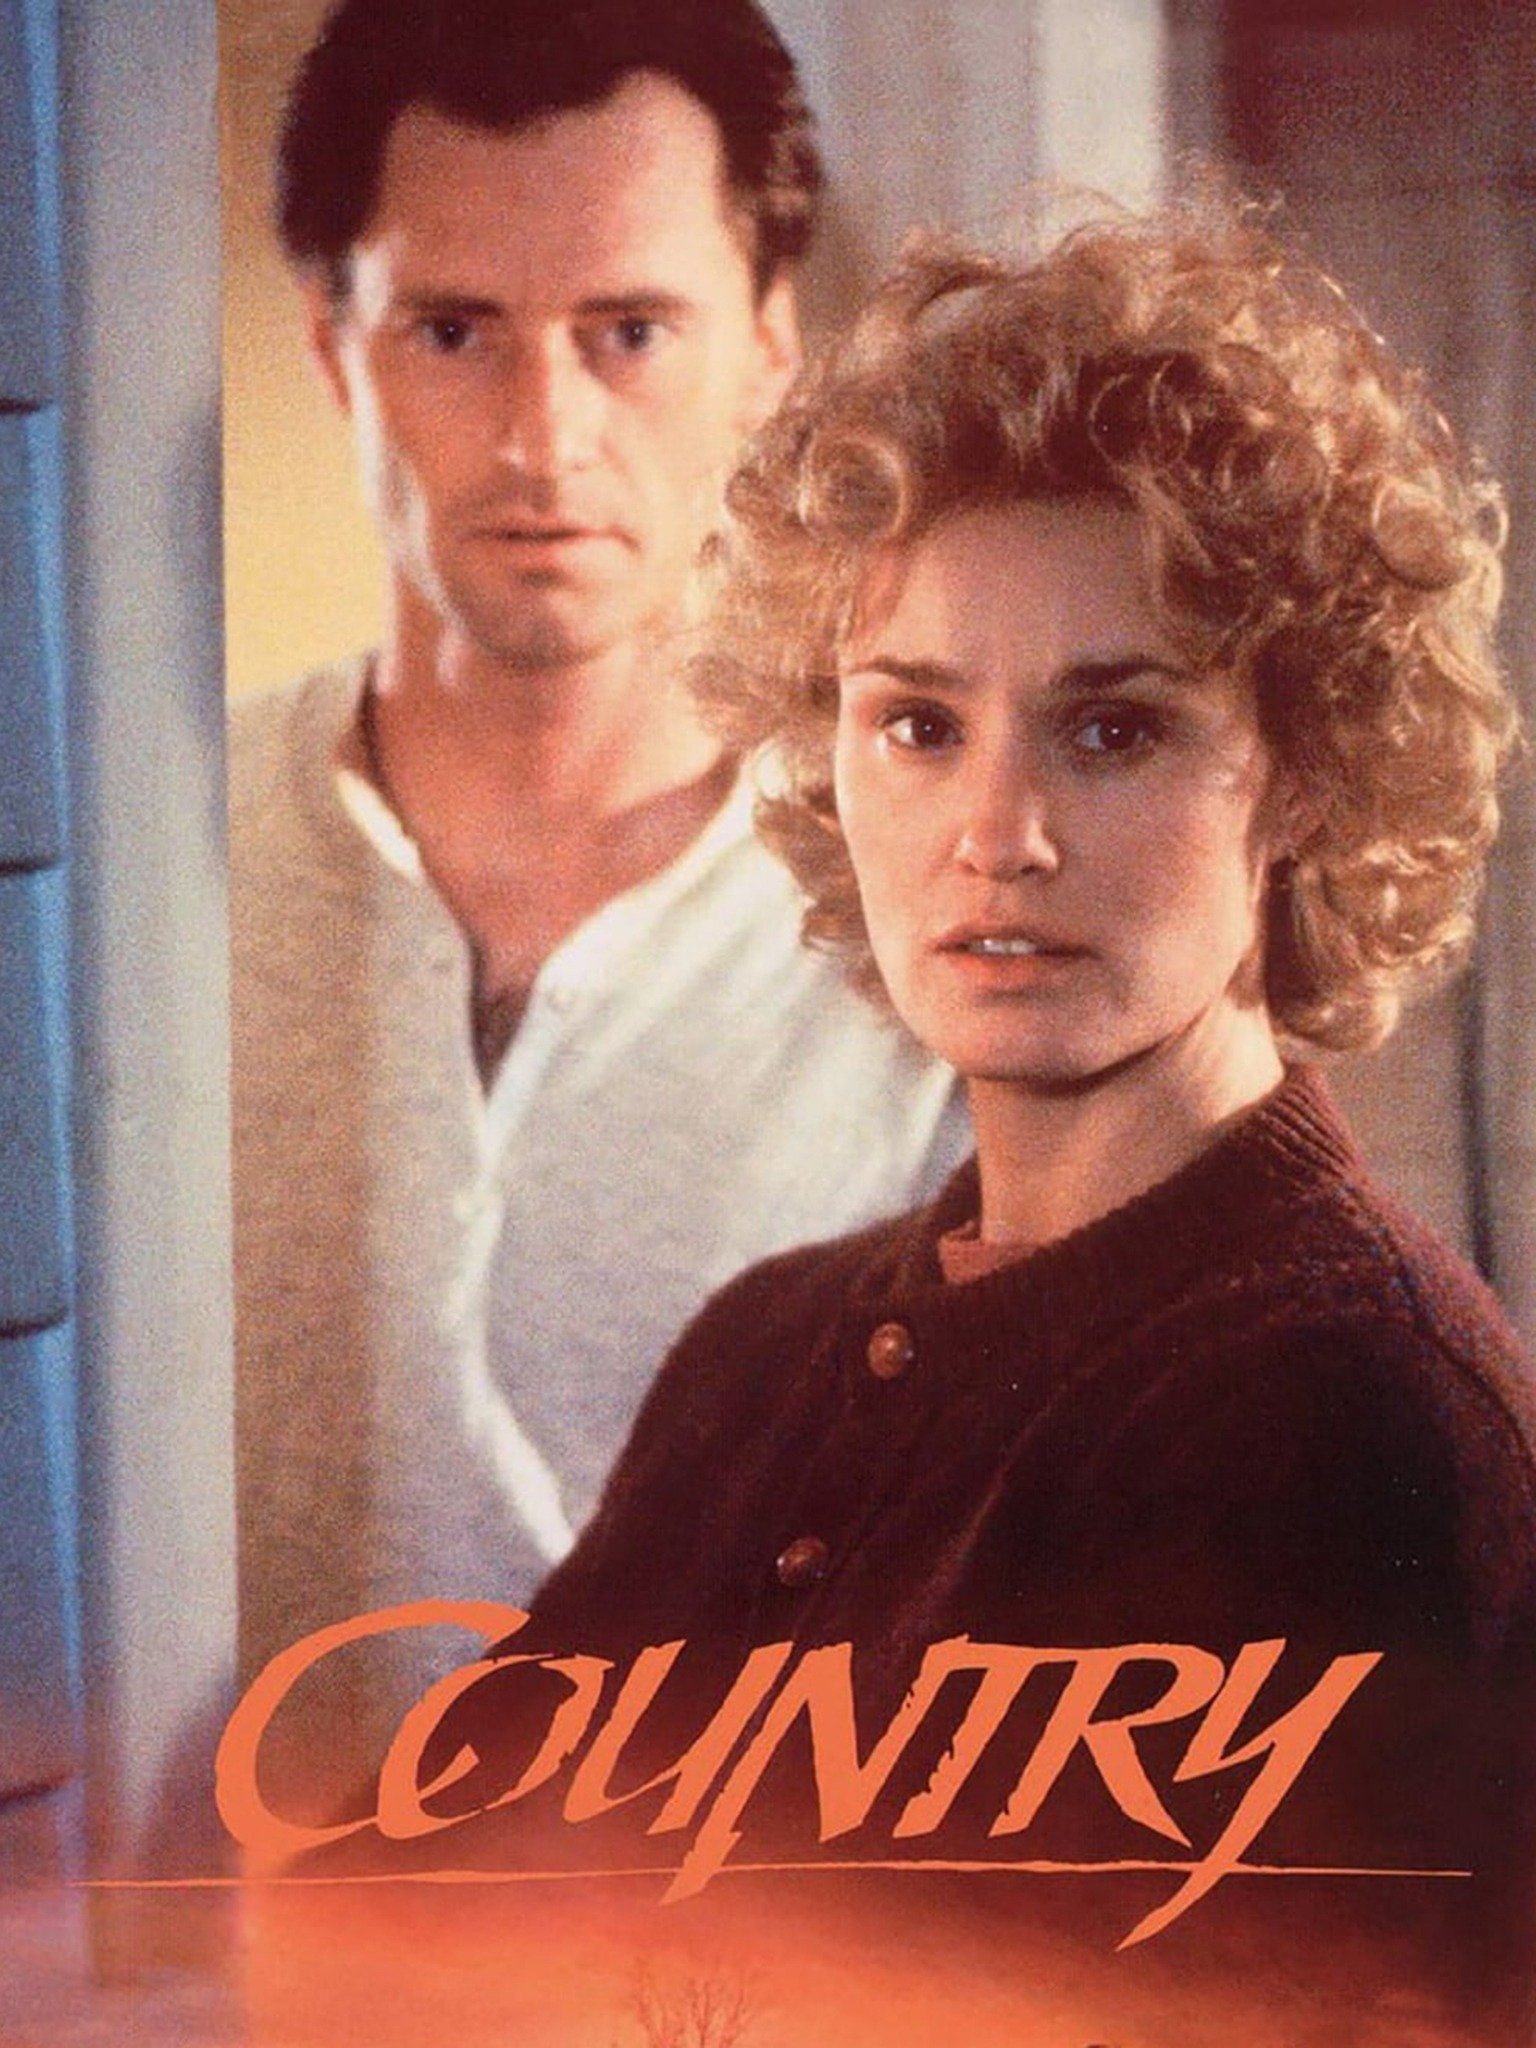 country 1984 movie review